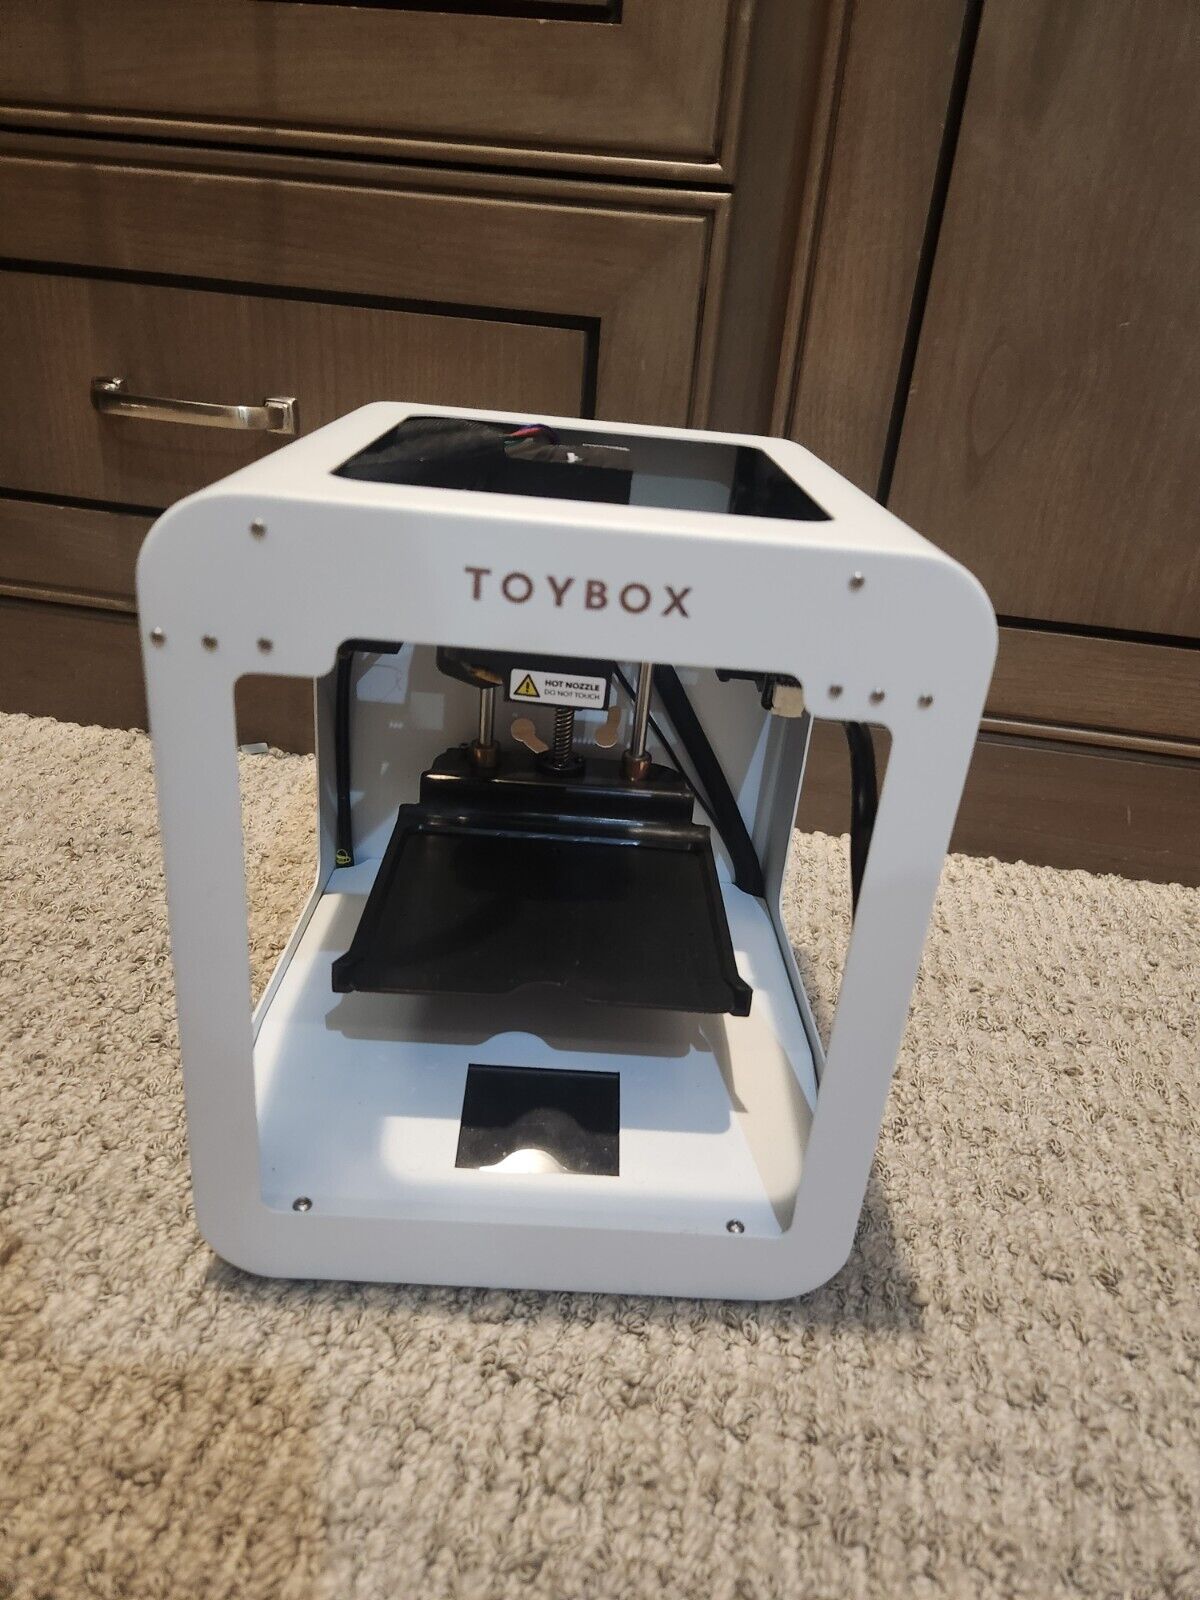 Toy box 3d printer opened only 5 uses